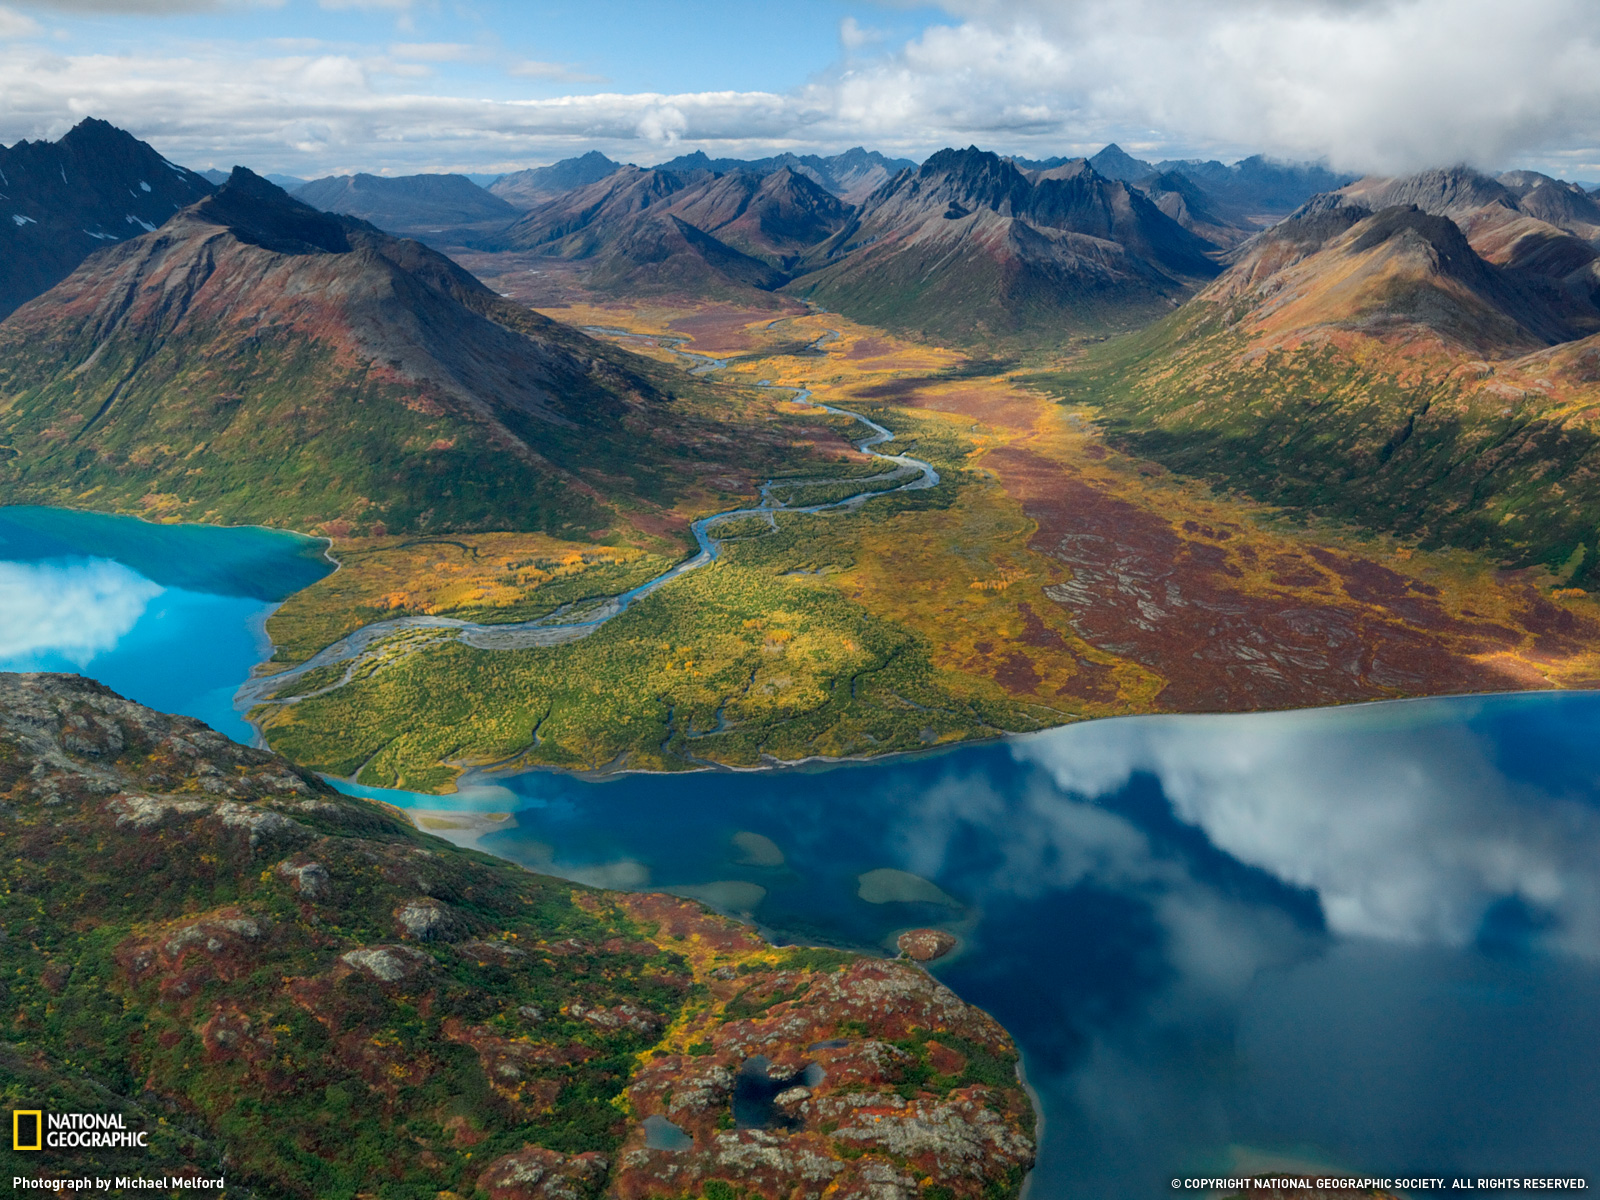  Photo Alaska Wallpaper National Geographic Photo of the Day 1600x1200